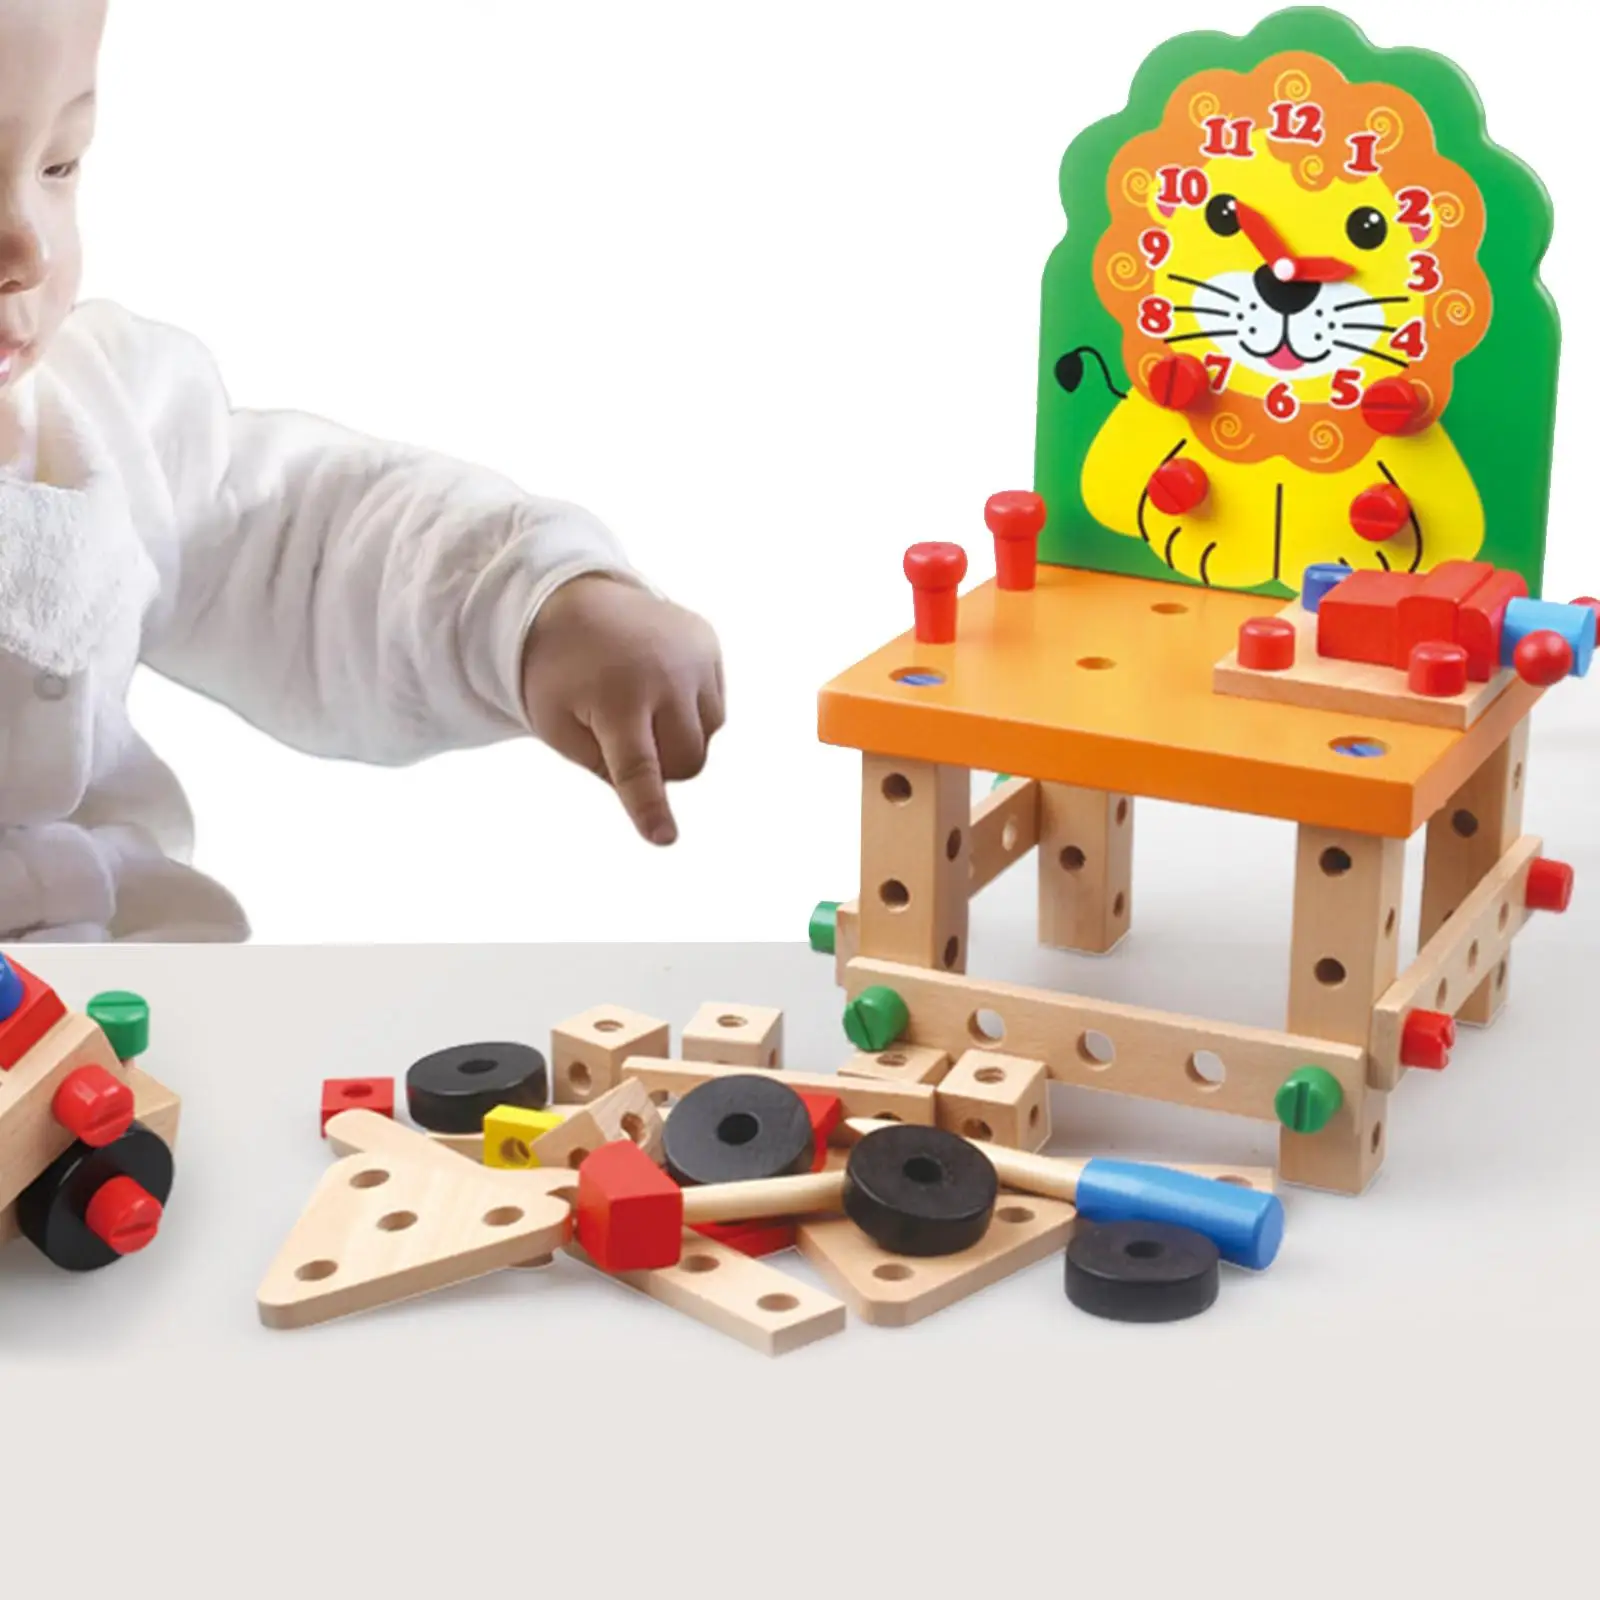 Wooden Assembling Chair Educational Building Toy with Tools Wooden Chair Models Construction Play Set for Children Girls Boys